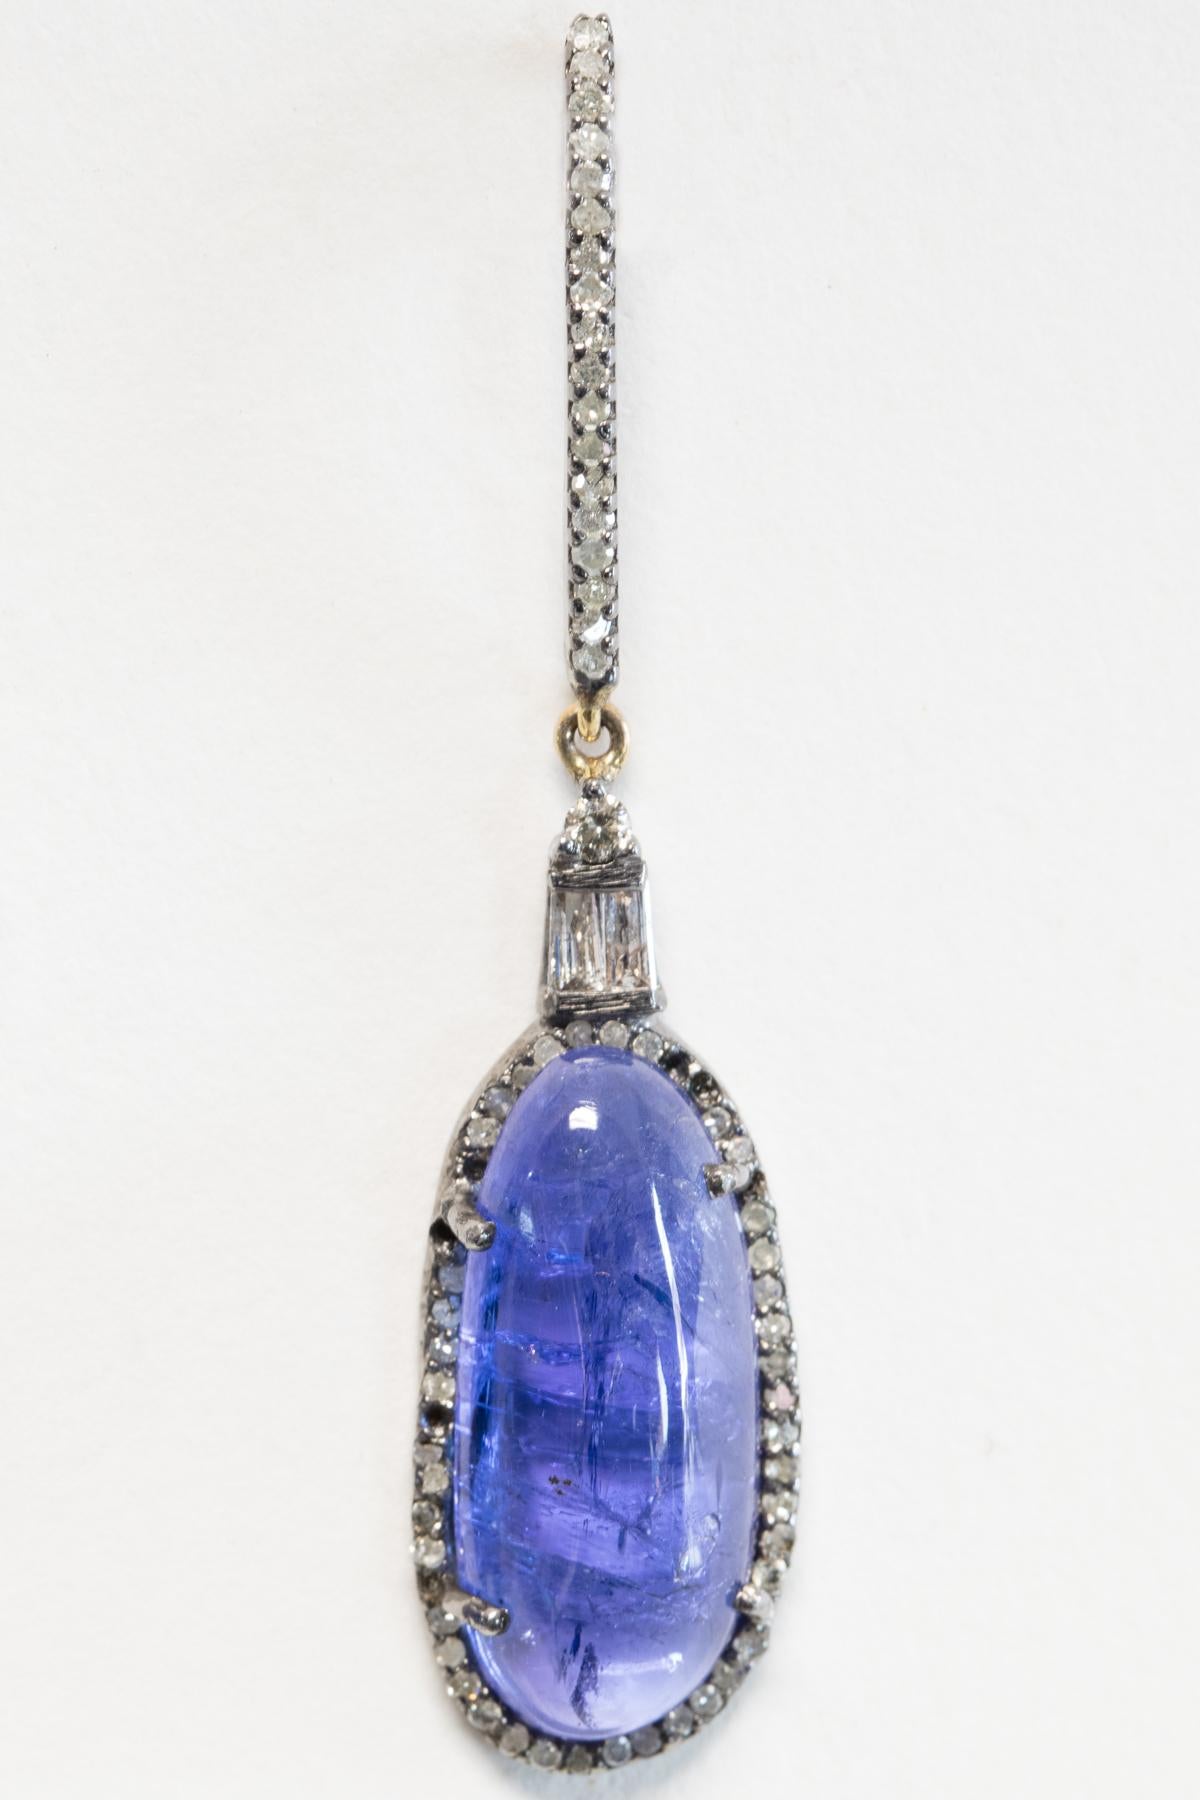 Oval cabochon tanzanite drop earrings bordered in pave`-set diamonds with baguette diamonds above the stone and a single solitaire.  Joins with a linear line of pave`-set diamond post in 18K gold, for pierced ears.  Carat weight of diamonds is 1.26,